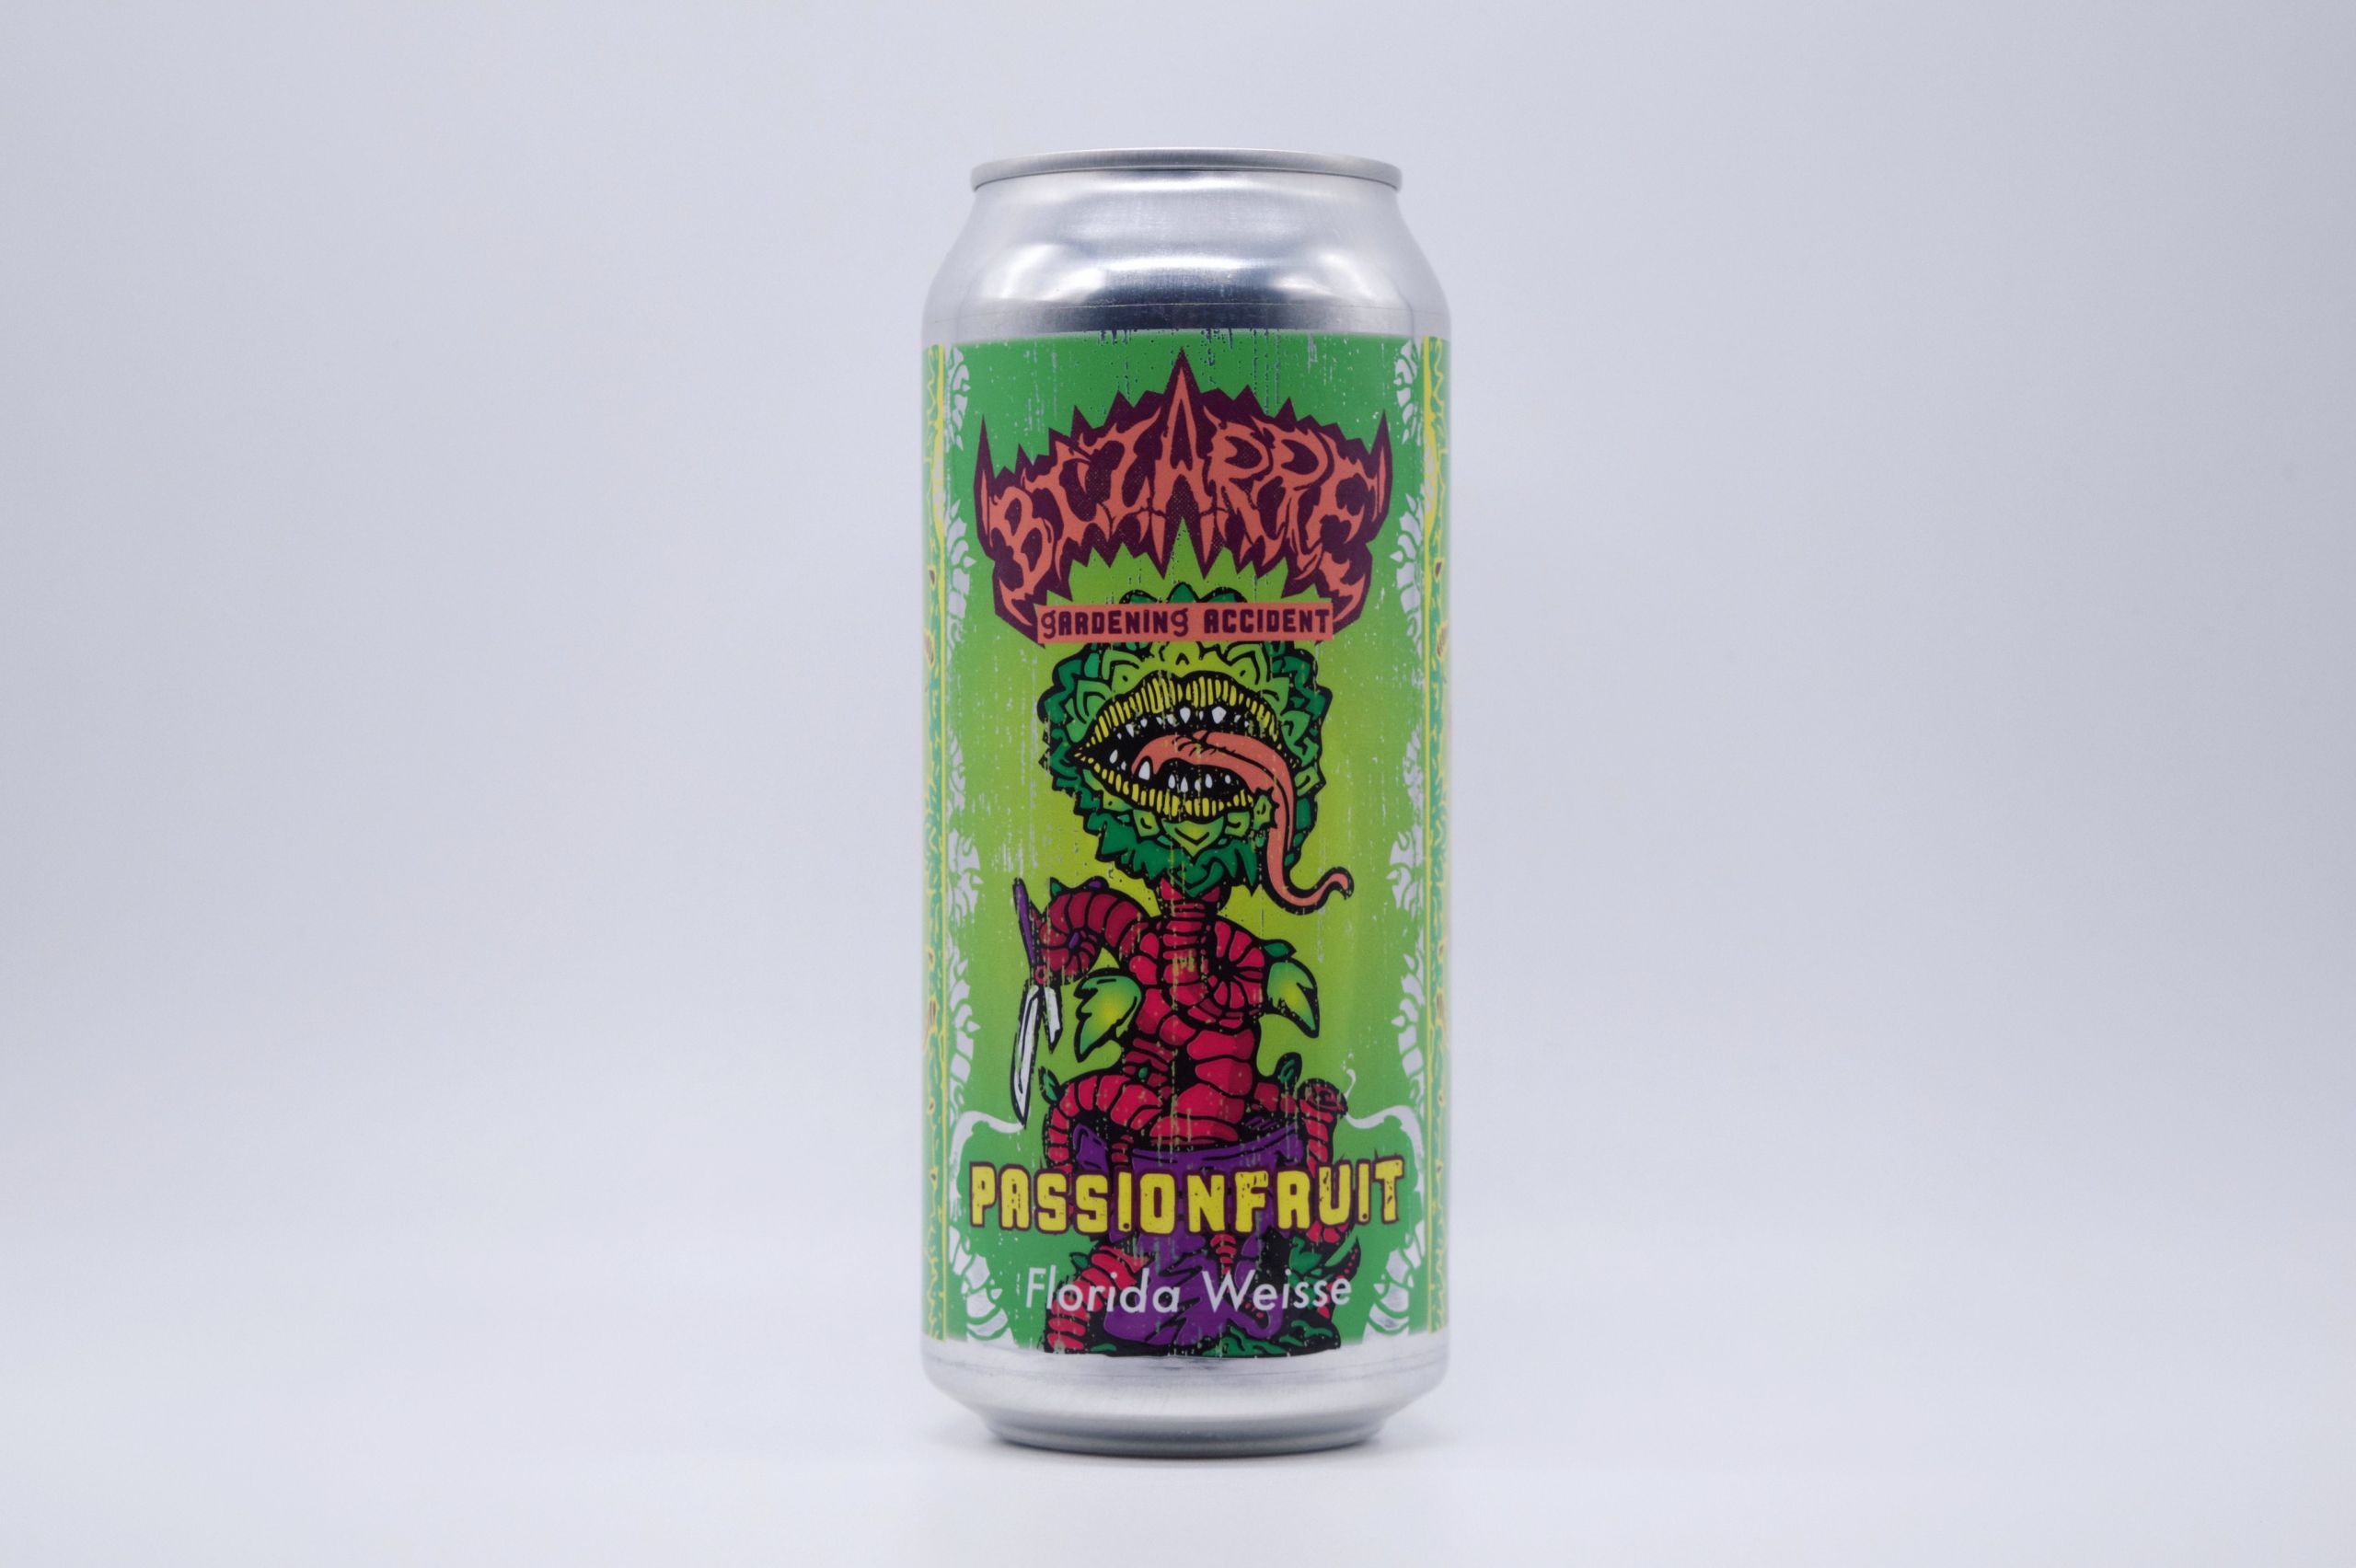 Passionfruit Bizarre Gardening Accident Florida Weisse in can